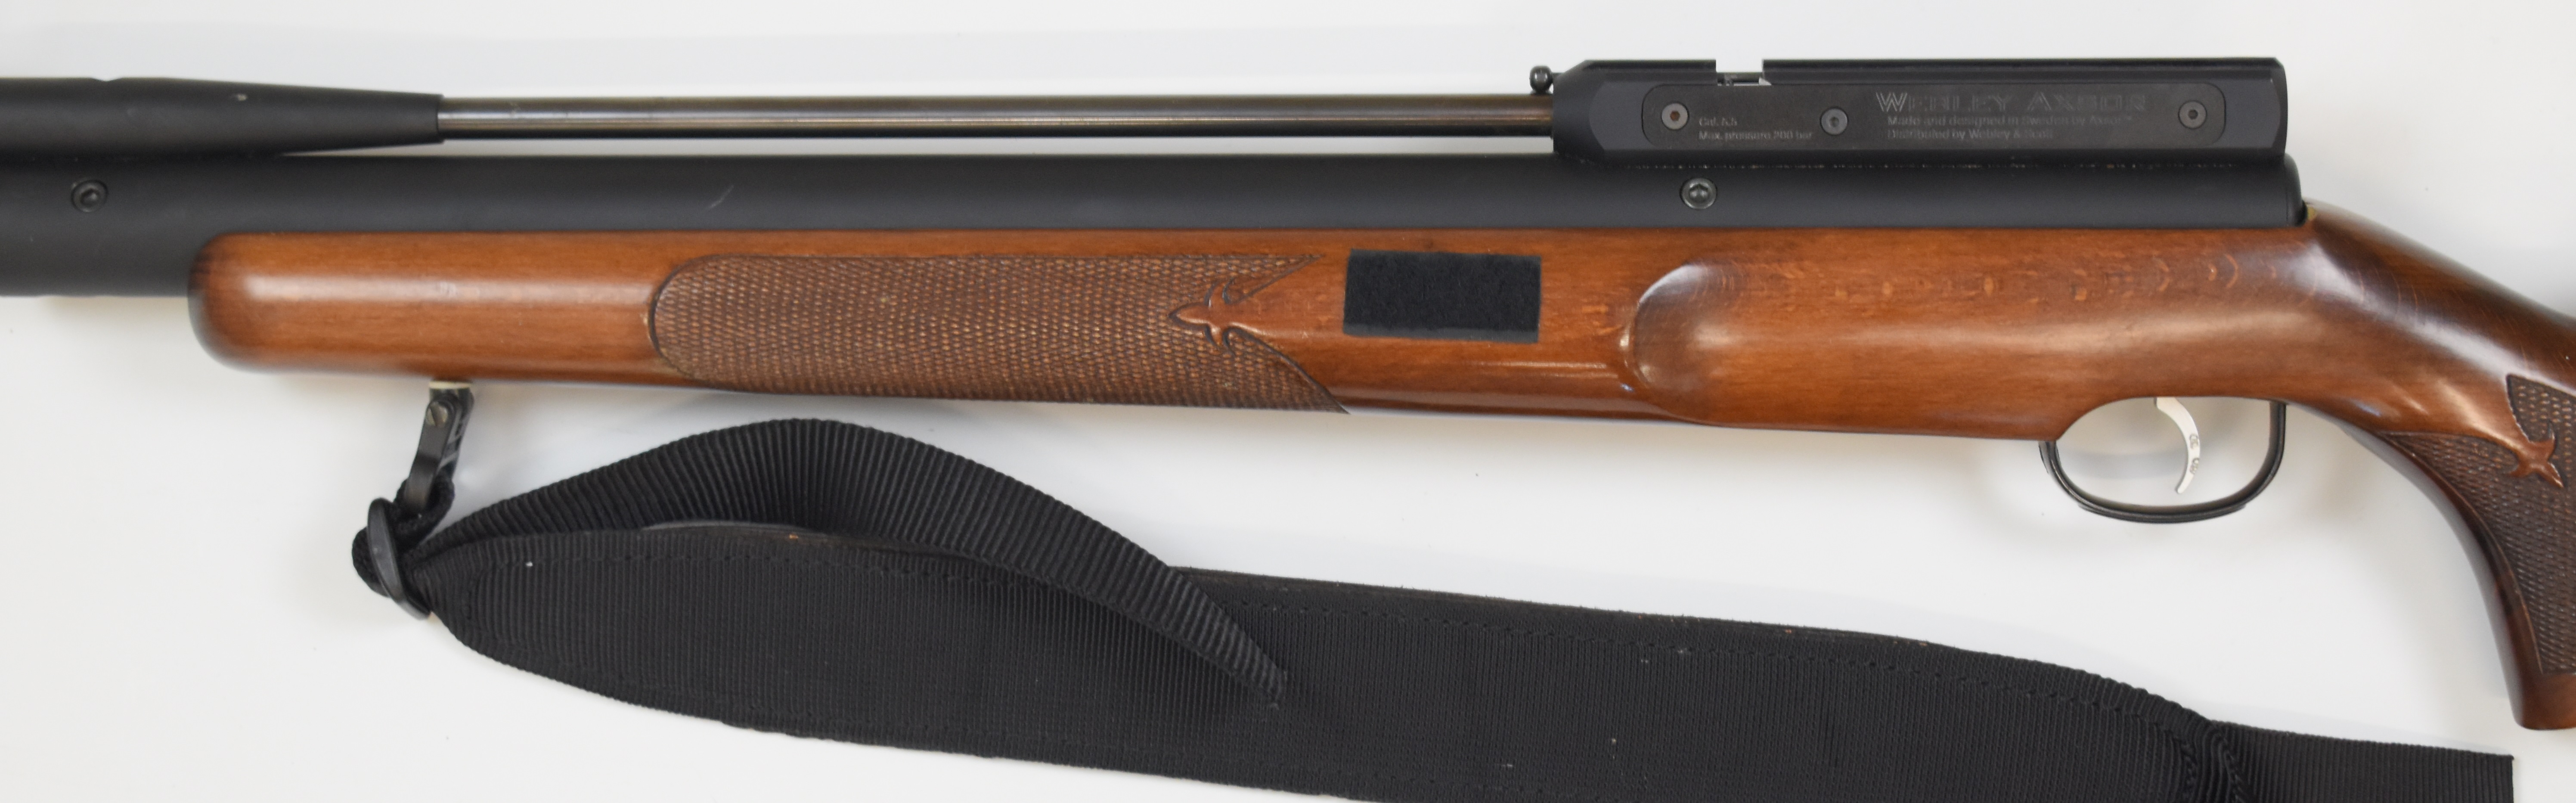 Webley Axsor .22 PCP air rifle with chequered semi-pistol grip and forend, raised cheek piece, - Image 8 of 20